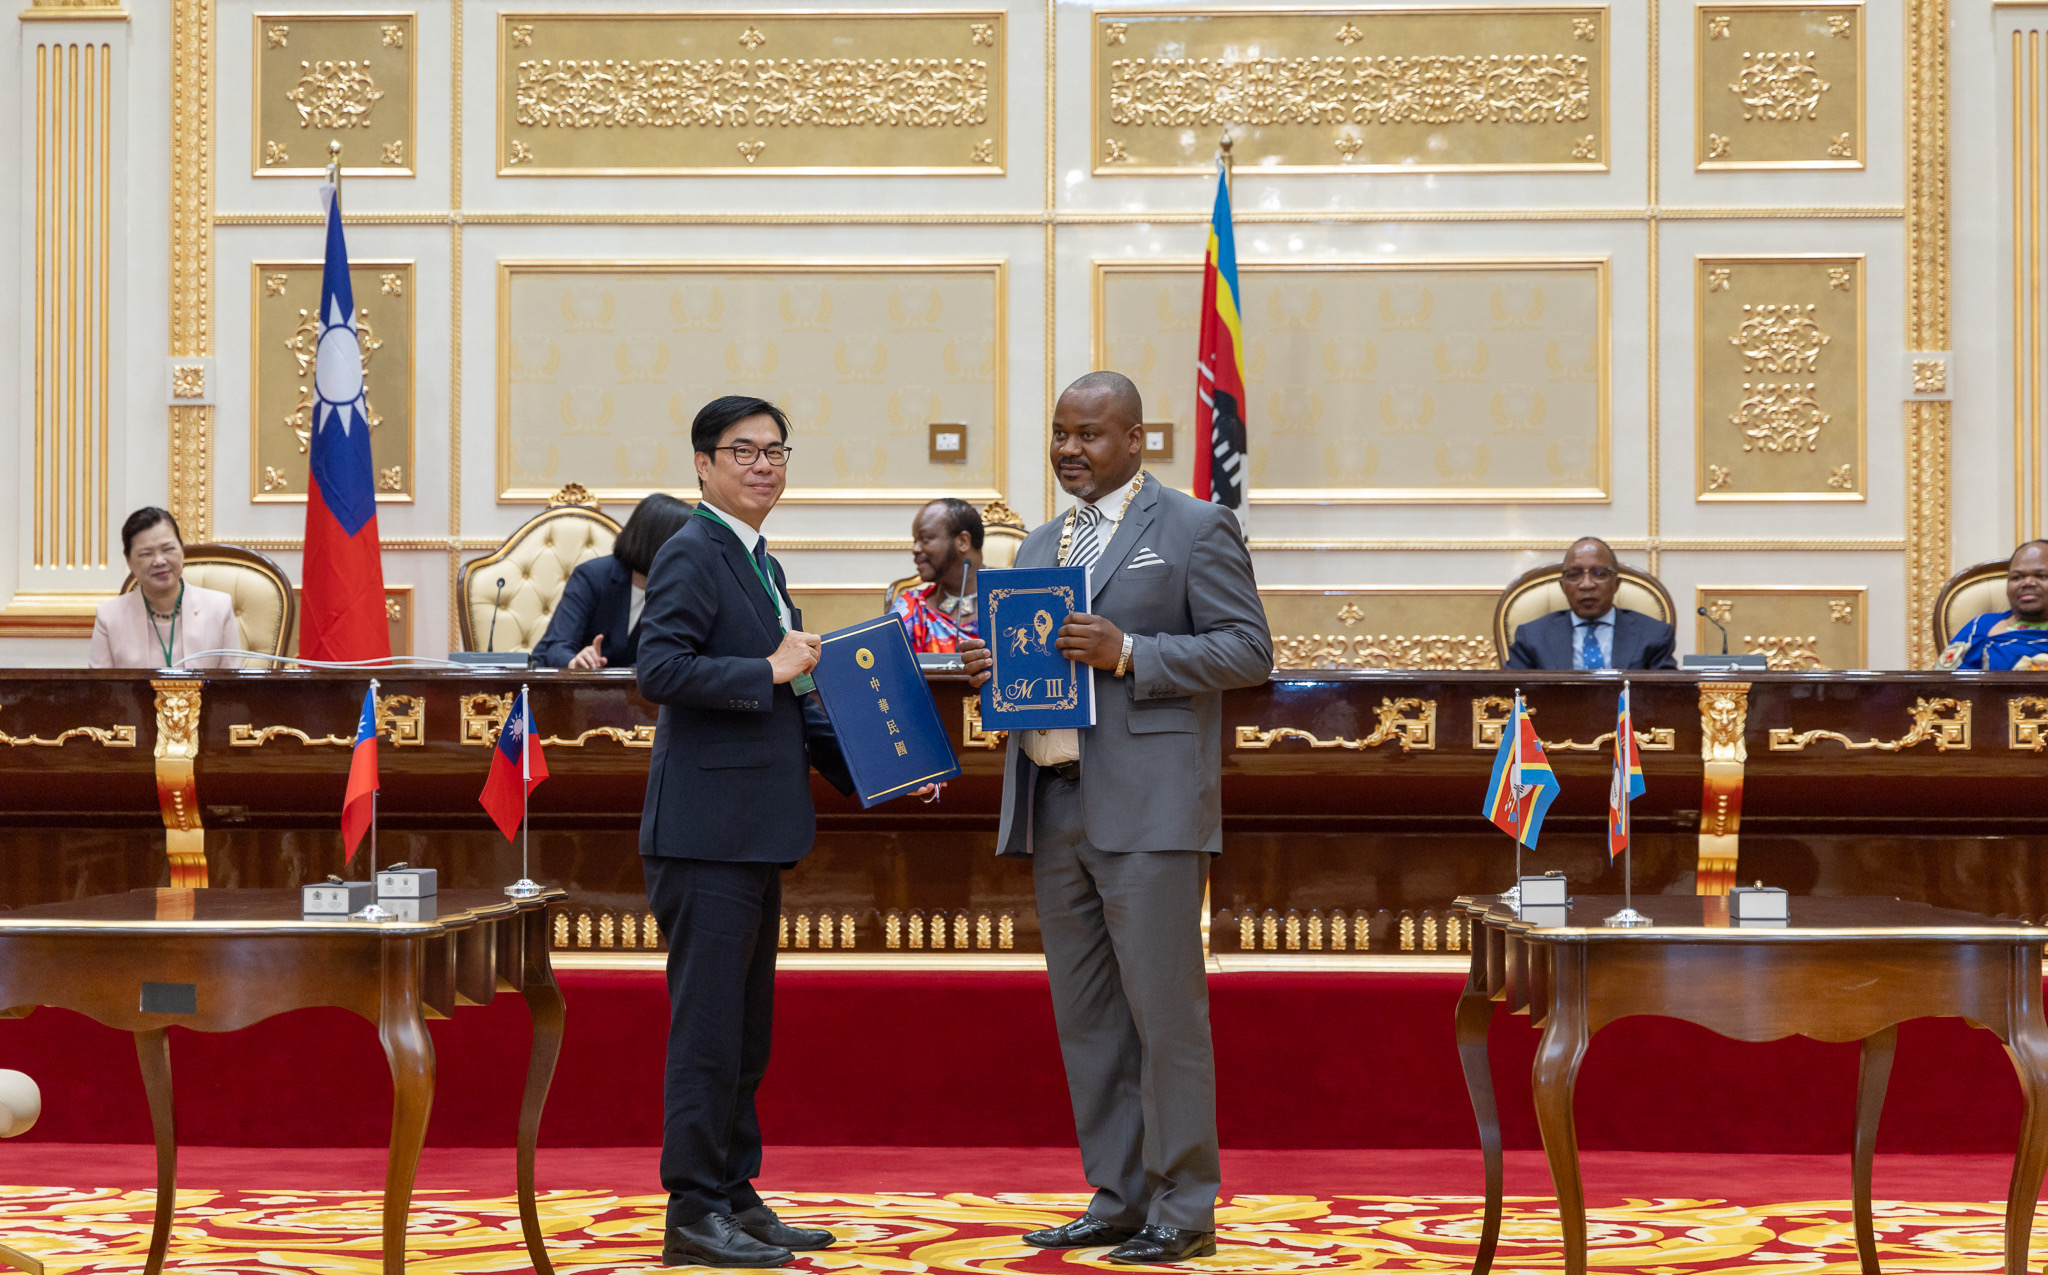 Kaohsiung and Mbabane signed the Sister City Agreement.